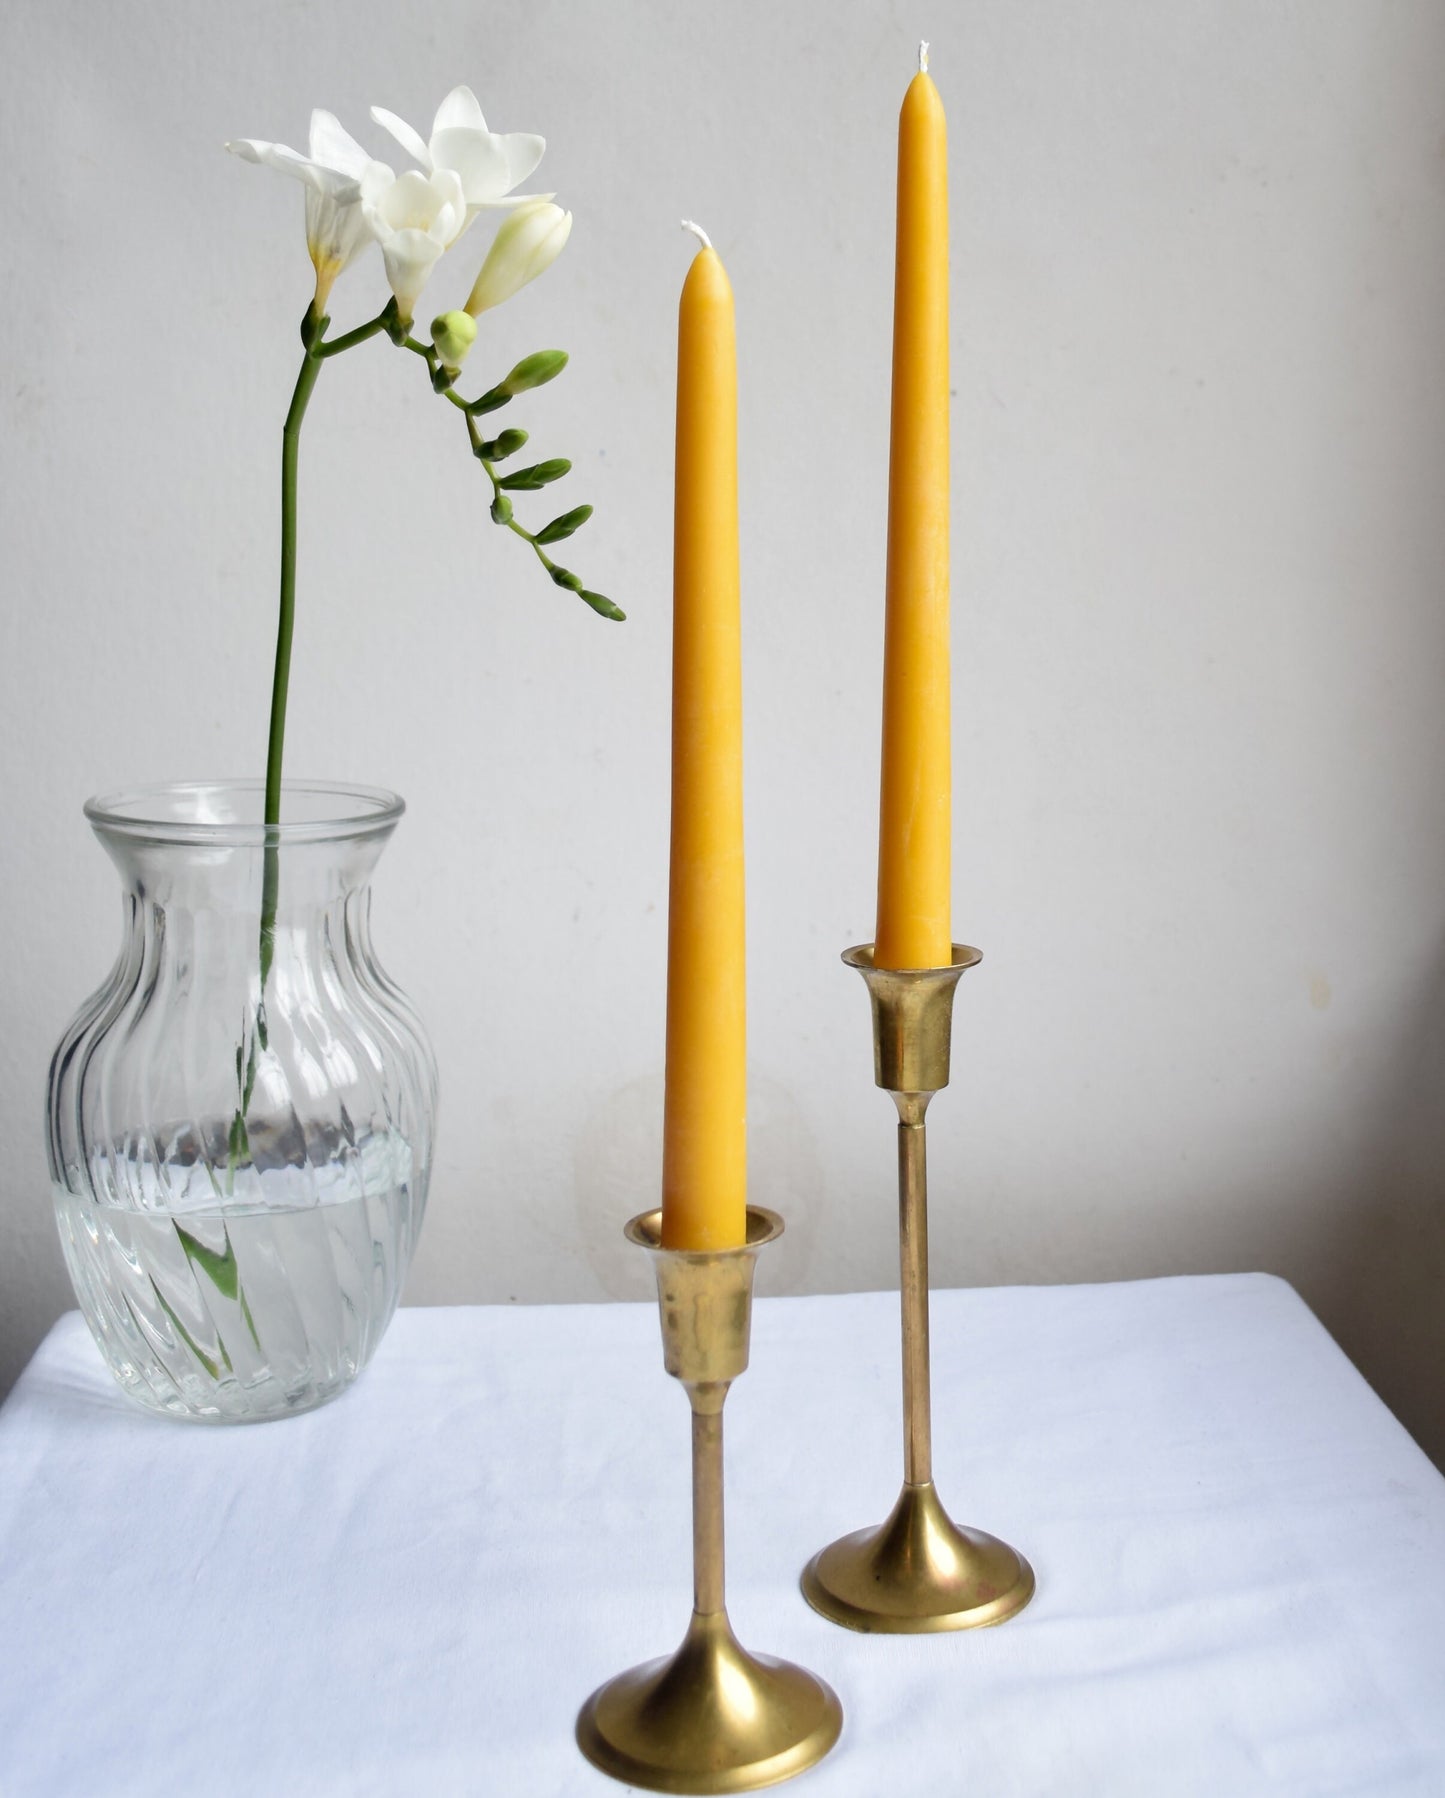 12" Tall Beeswax Taper Candles, 100% Pure Handfiltered Beeswax, Candles Pair of 2 // Tapers, Tapered Candles, Beeswax Candles